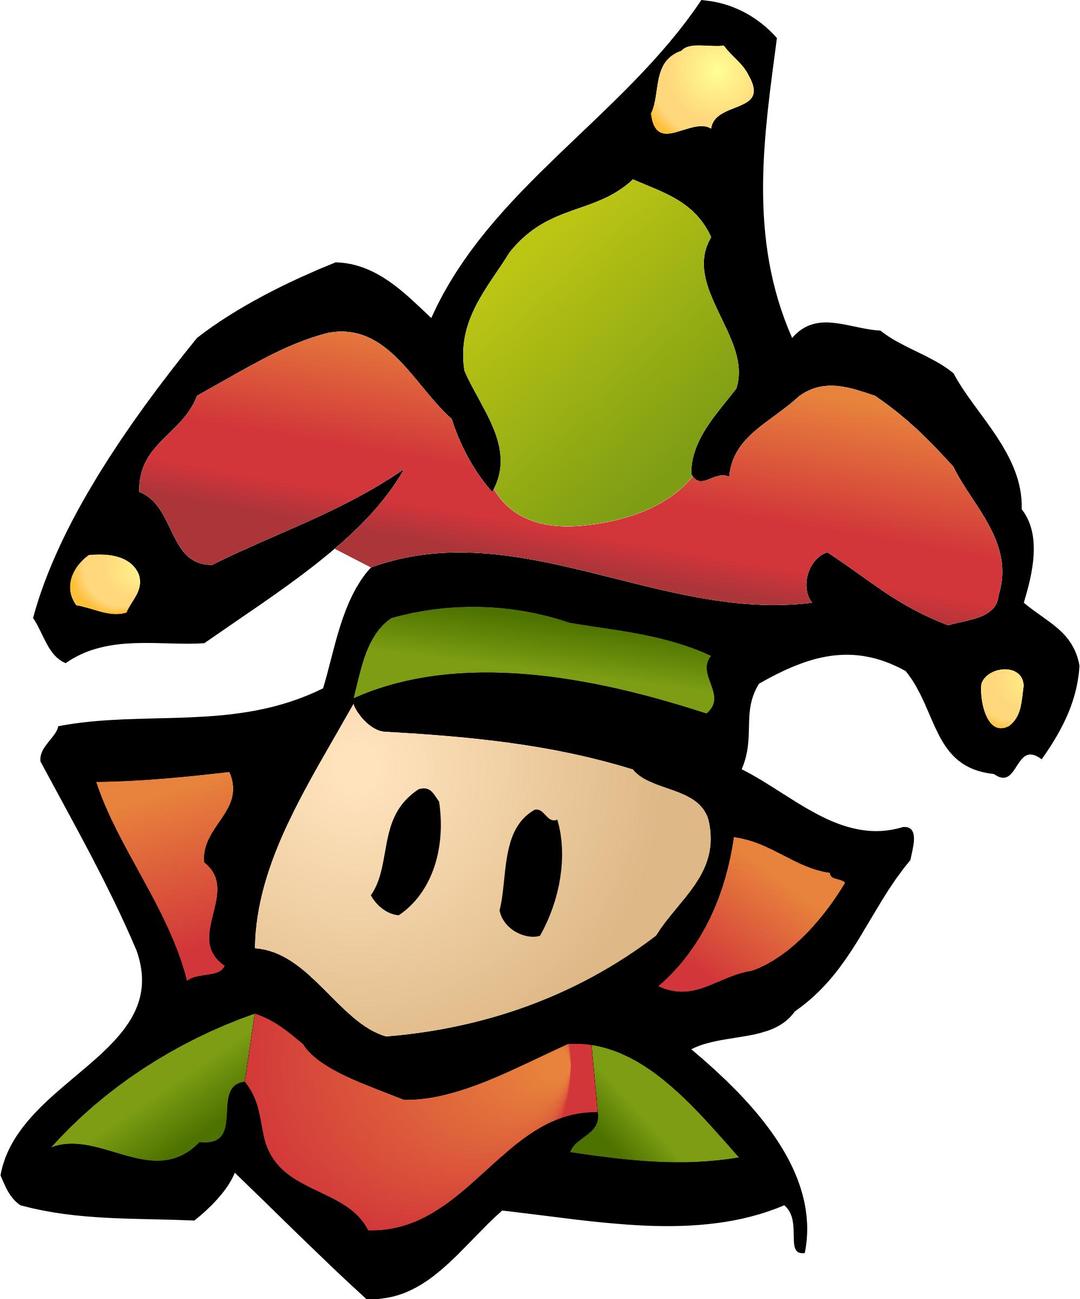 jester icon png transparent